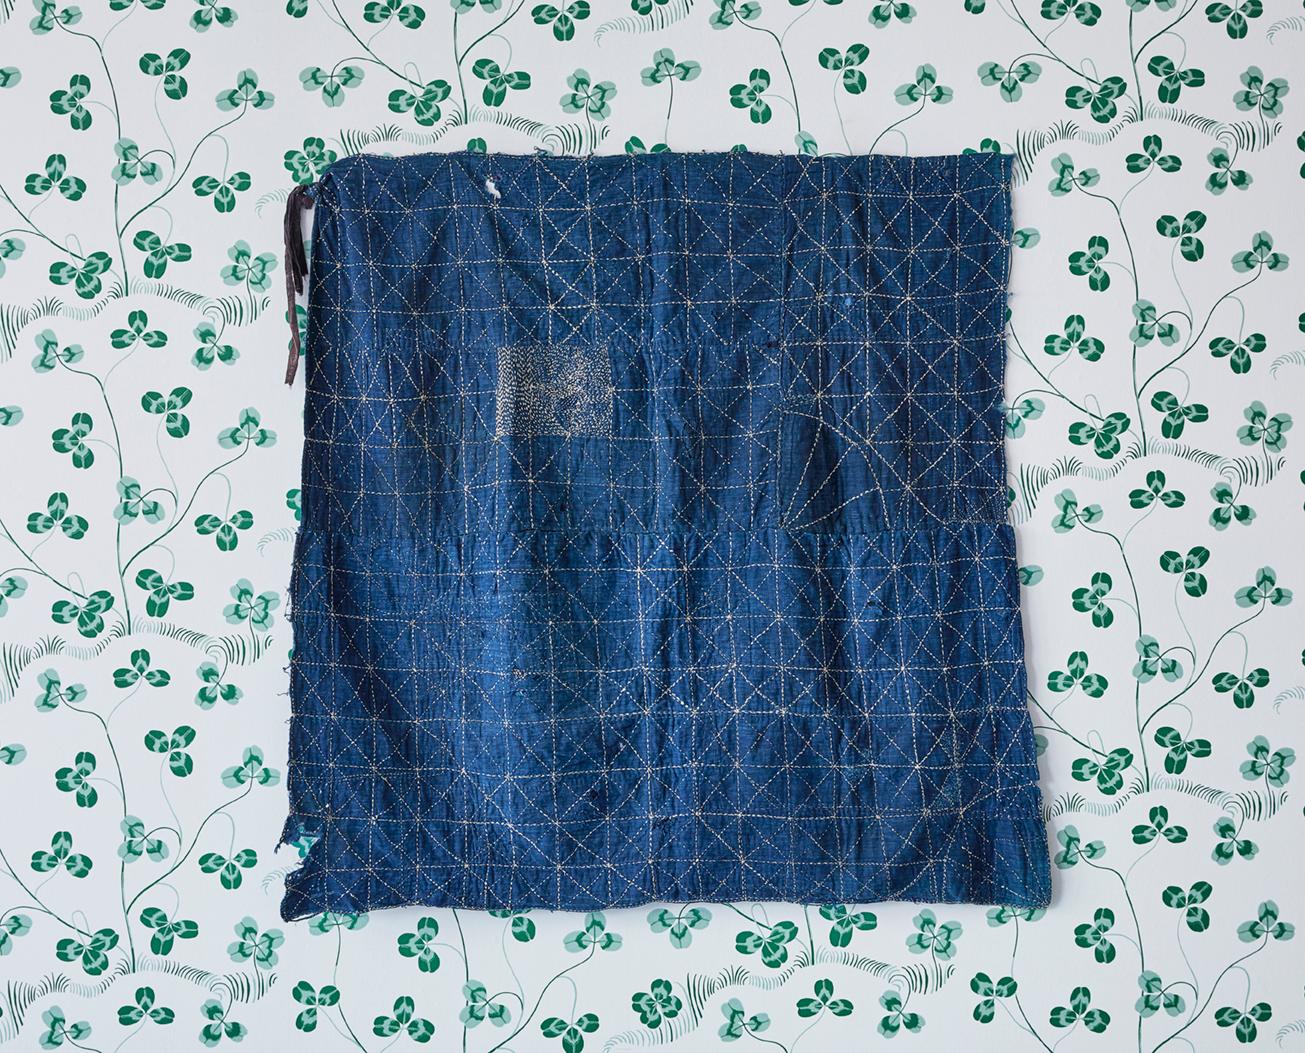 Japan, Vintage

Delicate handcrafted antique patched 'Boro' textile with detailed stitching.
Likely used as a Furoshiki or duvet cover. 

'Boro' are a class of Japanese textiles. During the Edo period, 'Boro' came to predominately signify clothing